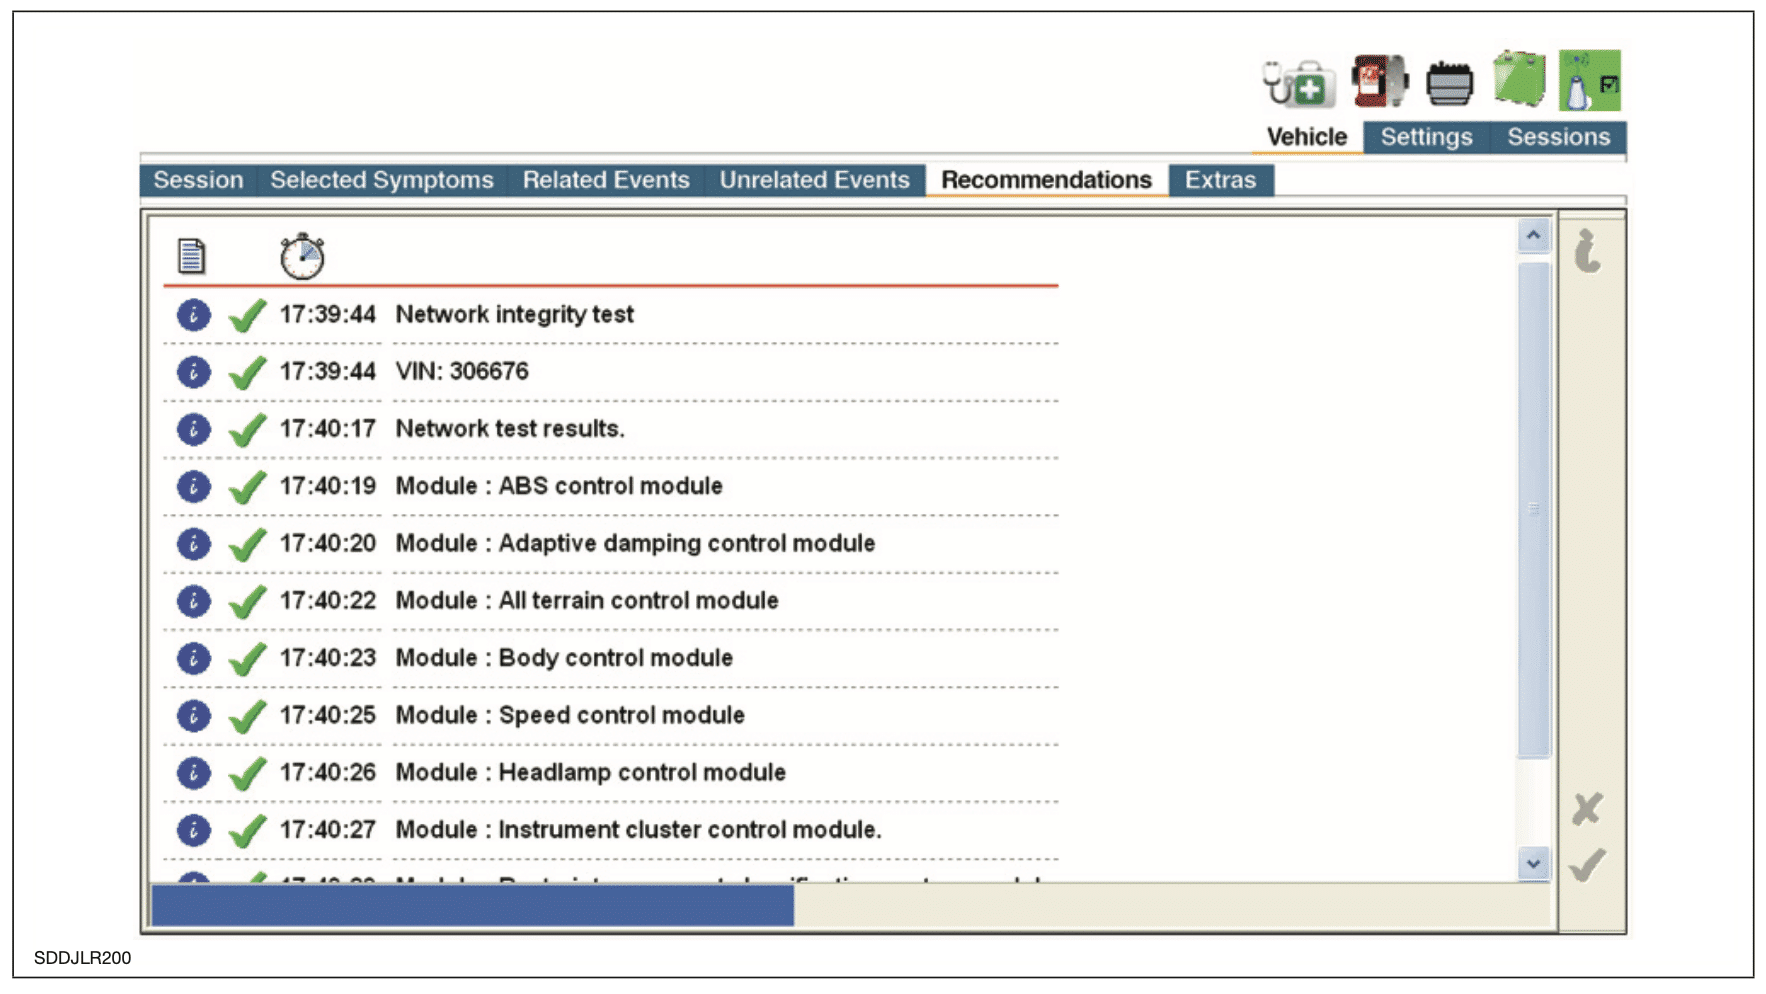 JLR SDD Software session screenshot for recommended actions checklist after vehicle symptoms report